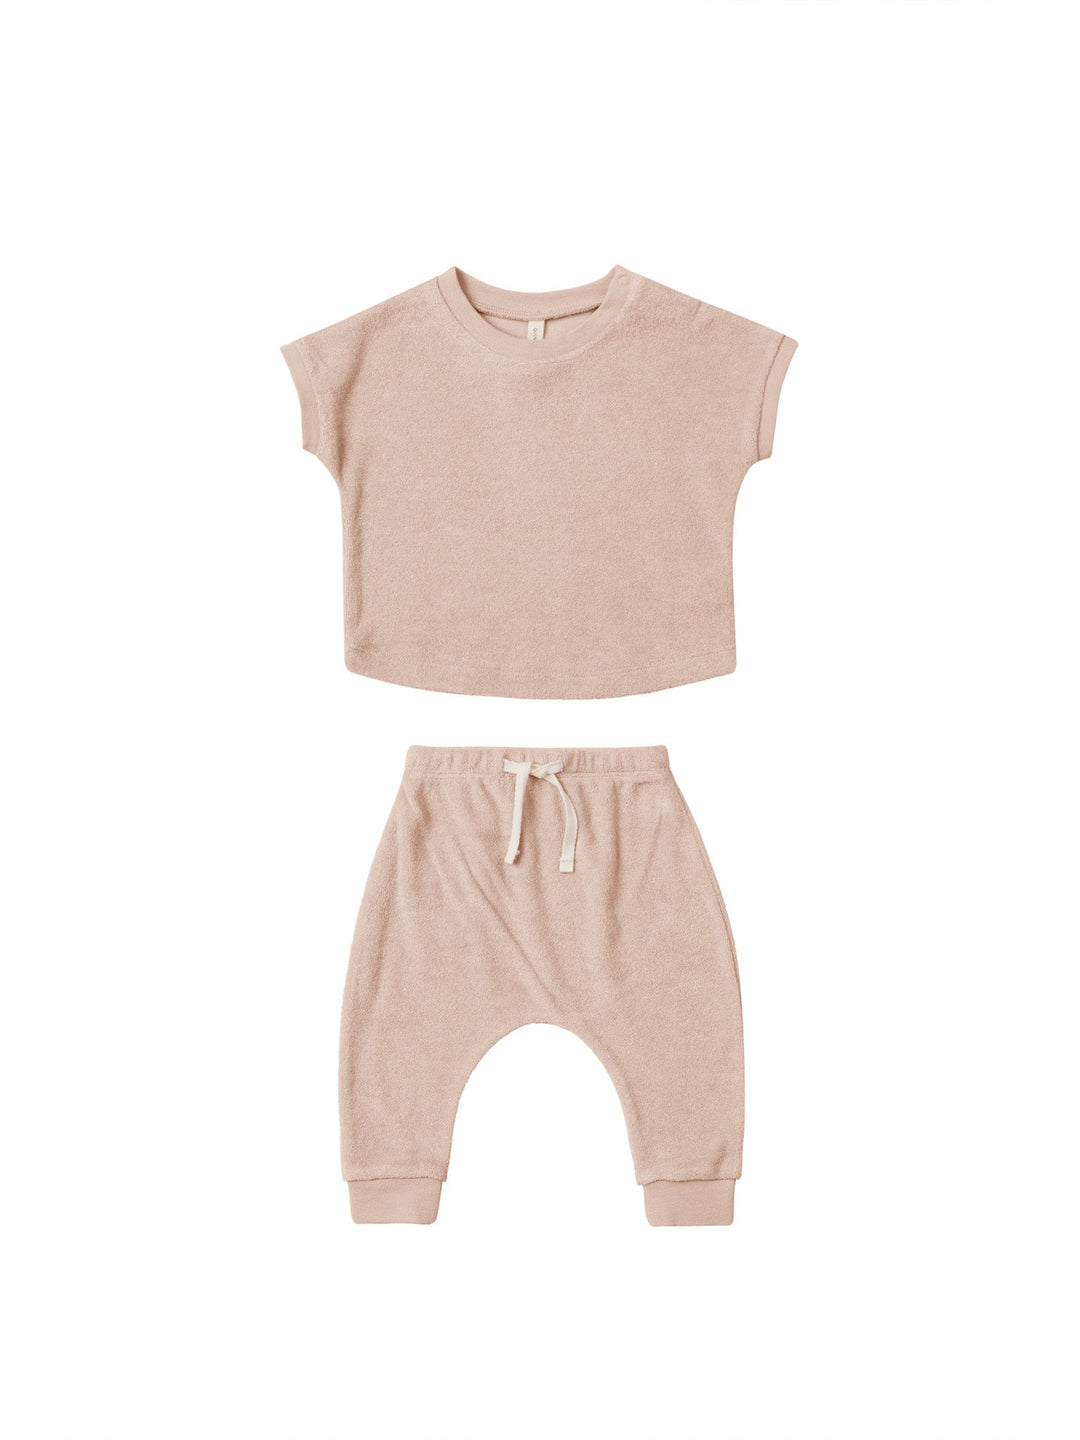 Quincy Mae 2-Piece Clothing Set Terry Tee and Pant Set - Blush